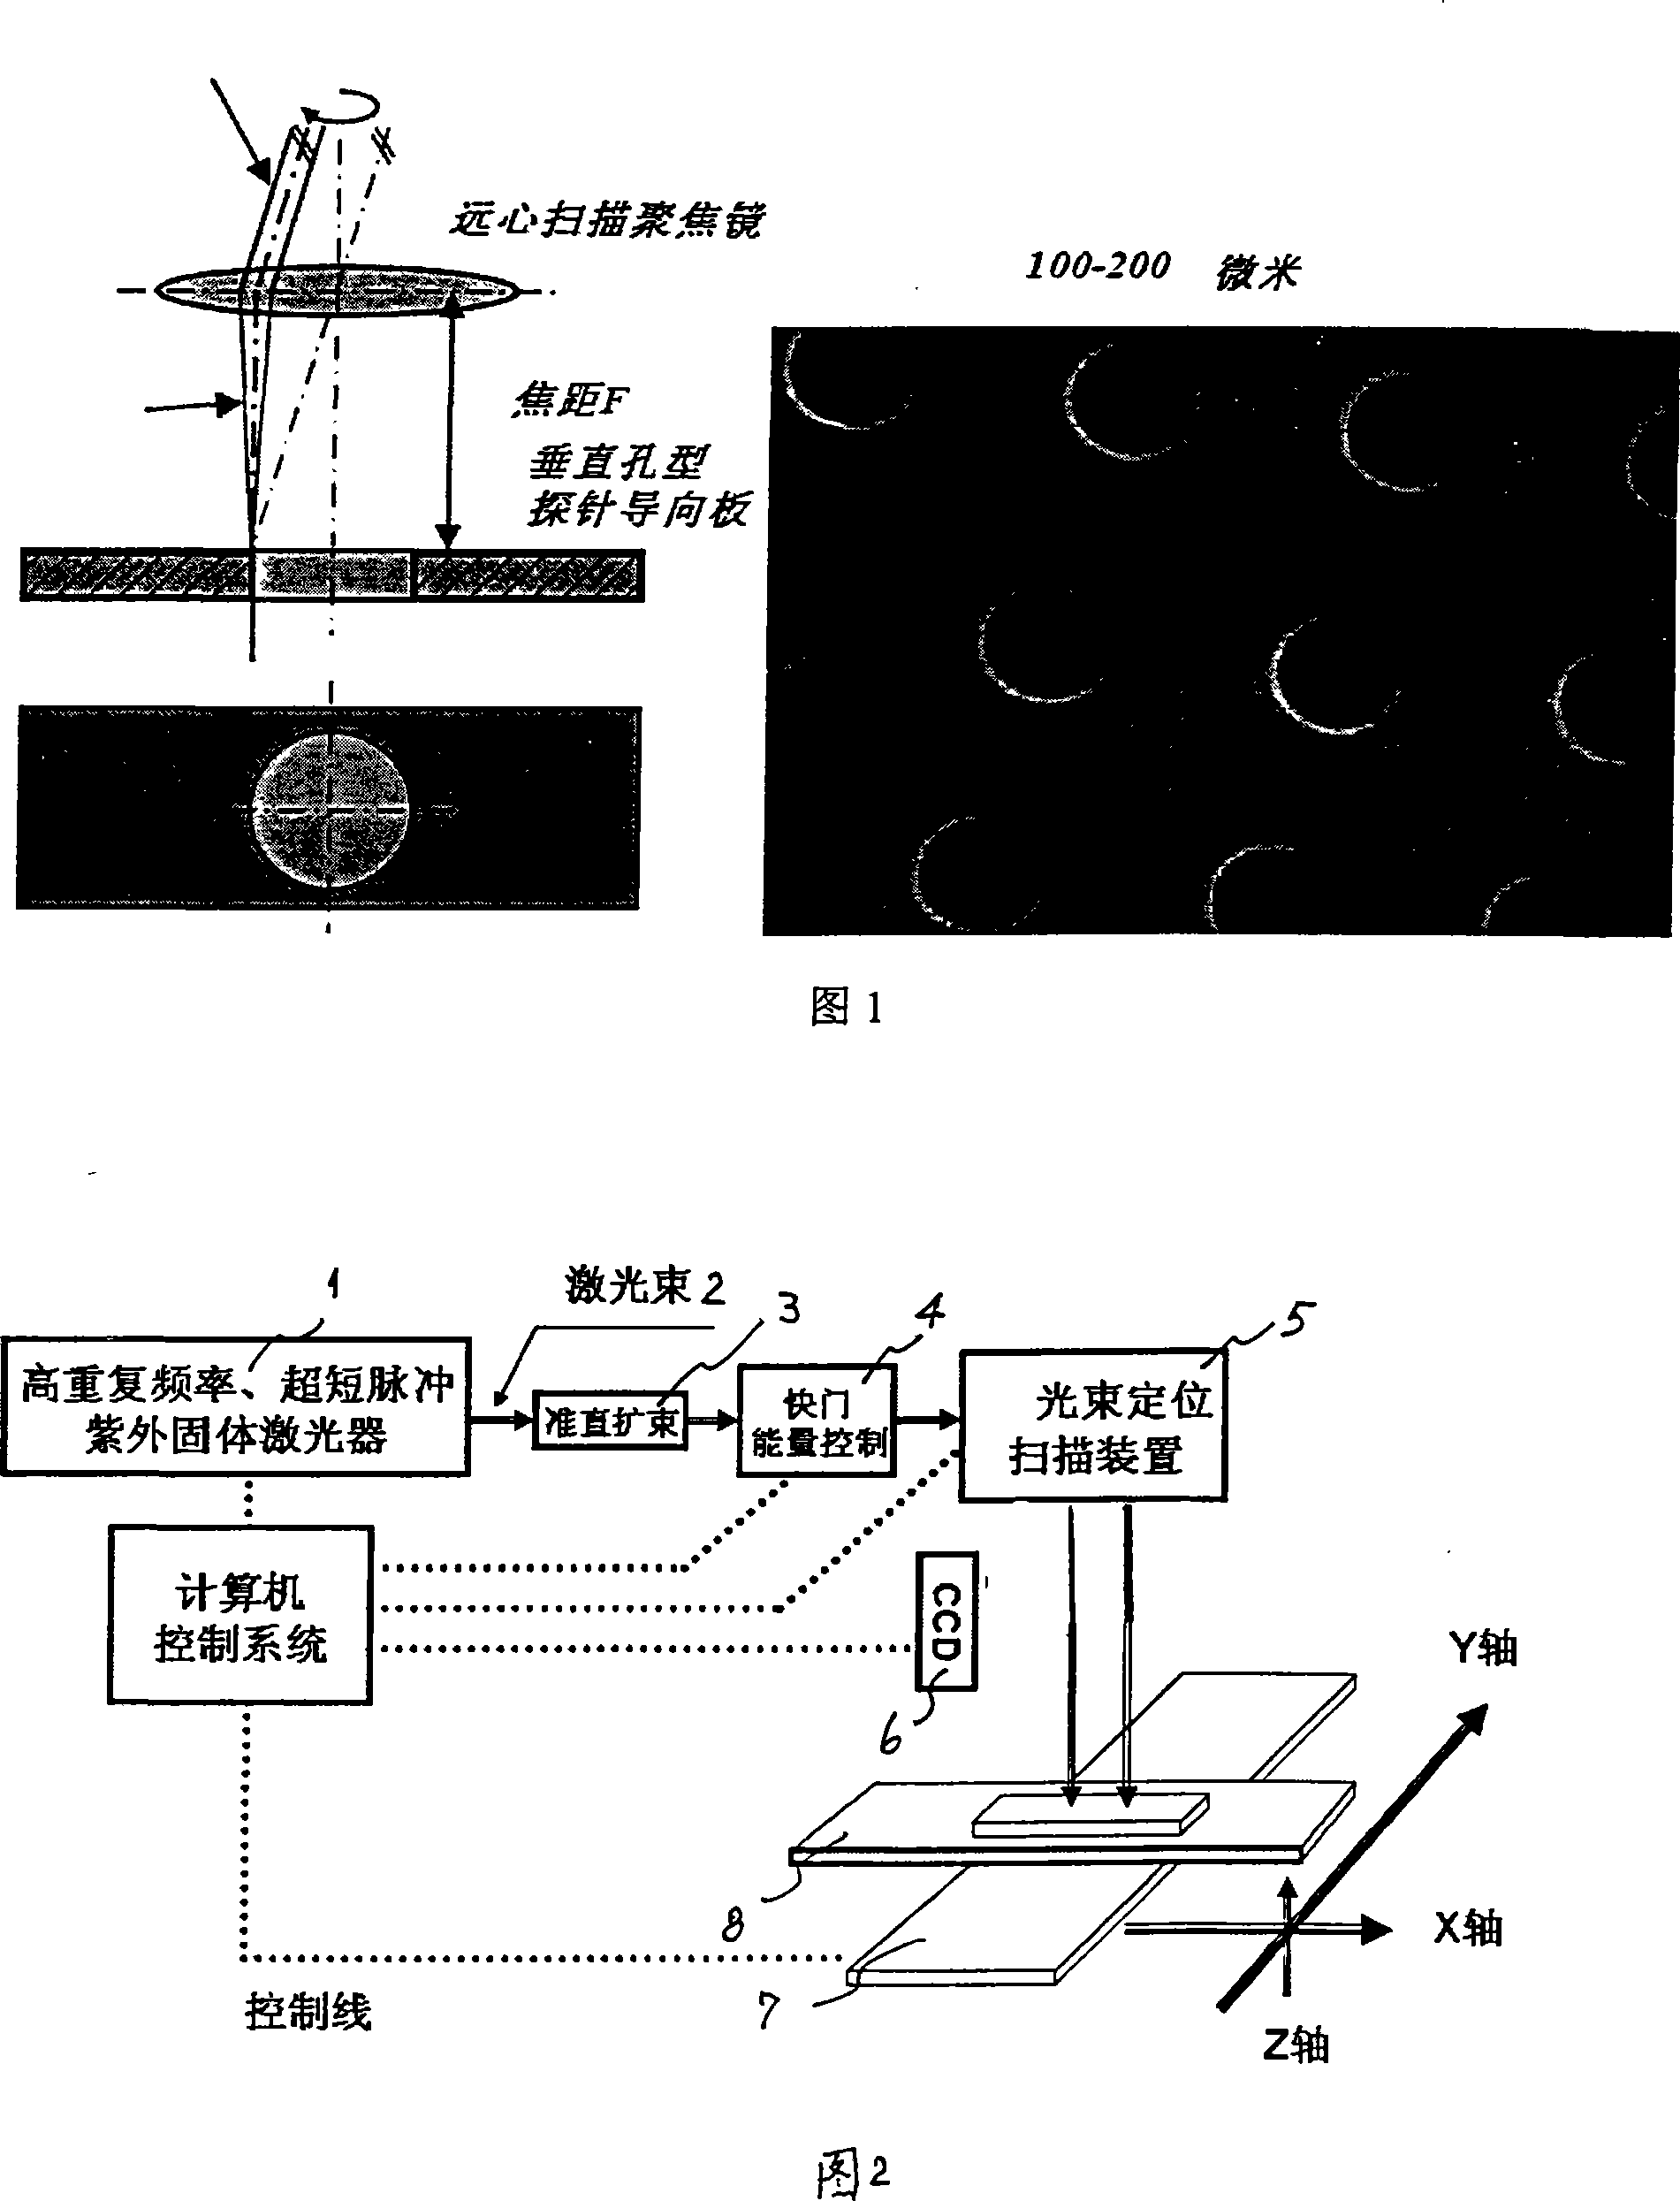 Laser array micro-pore forming device and method